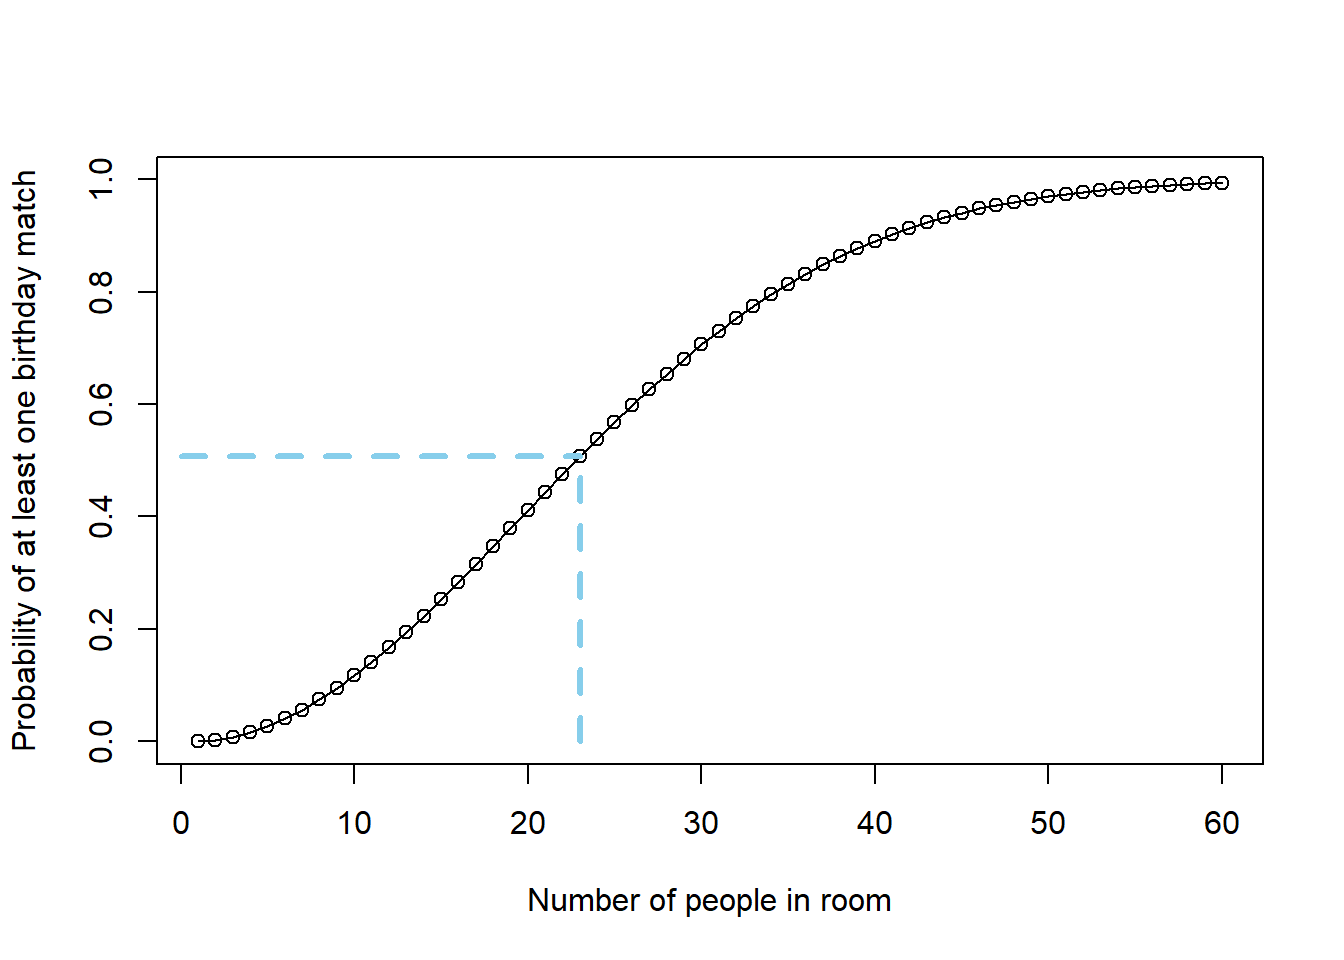 Probability of at least one birthday match as a function of the number of people in the room. For 23 people, the probability of at least one birthday match is 0.507.